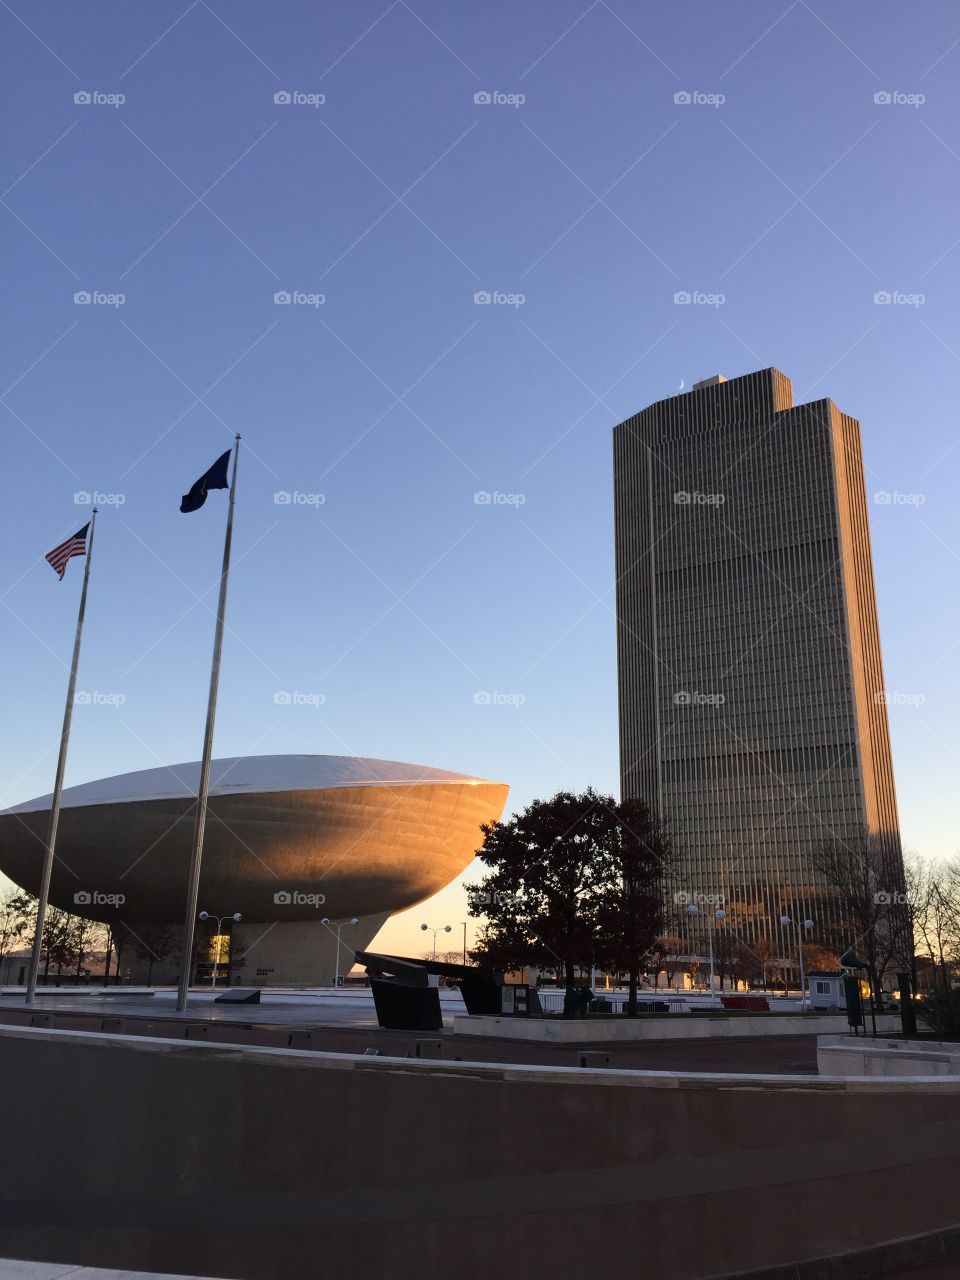 The Egg and the Corning Tower at The Empire State plaza, Albany NY